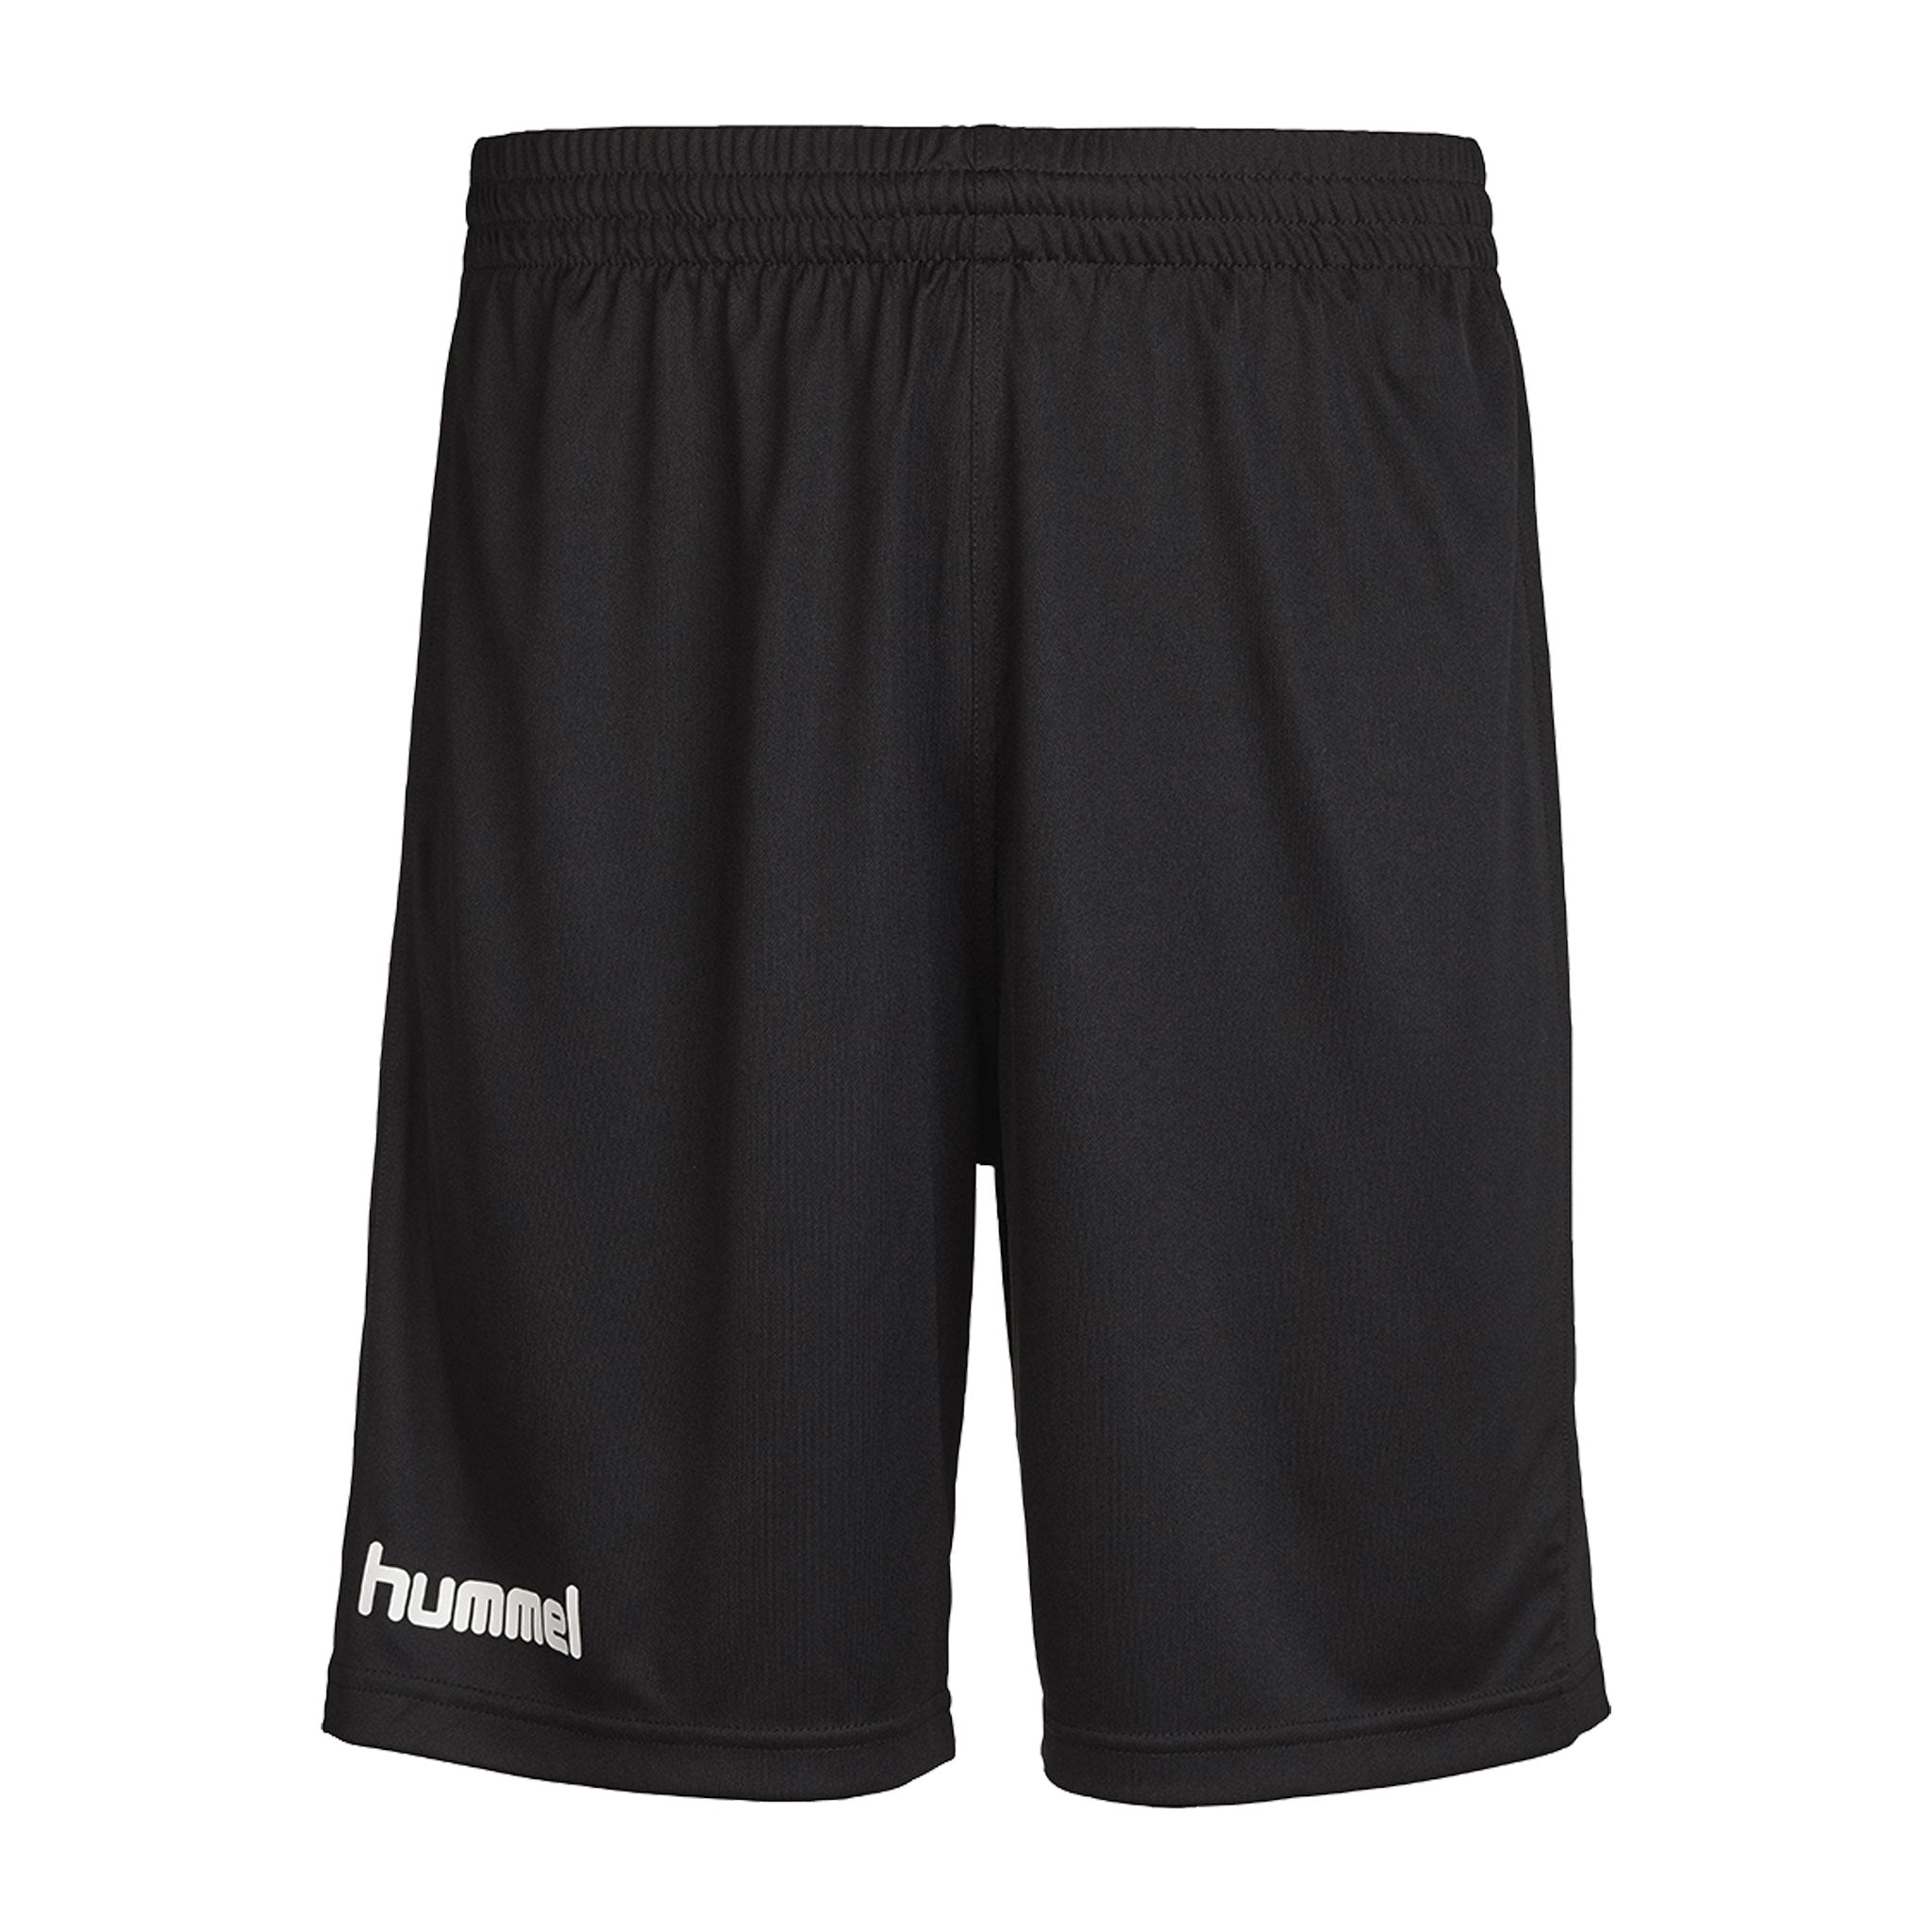 Hummel Youth Black – Red's Team Sports